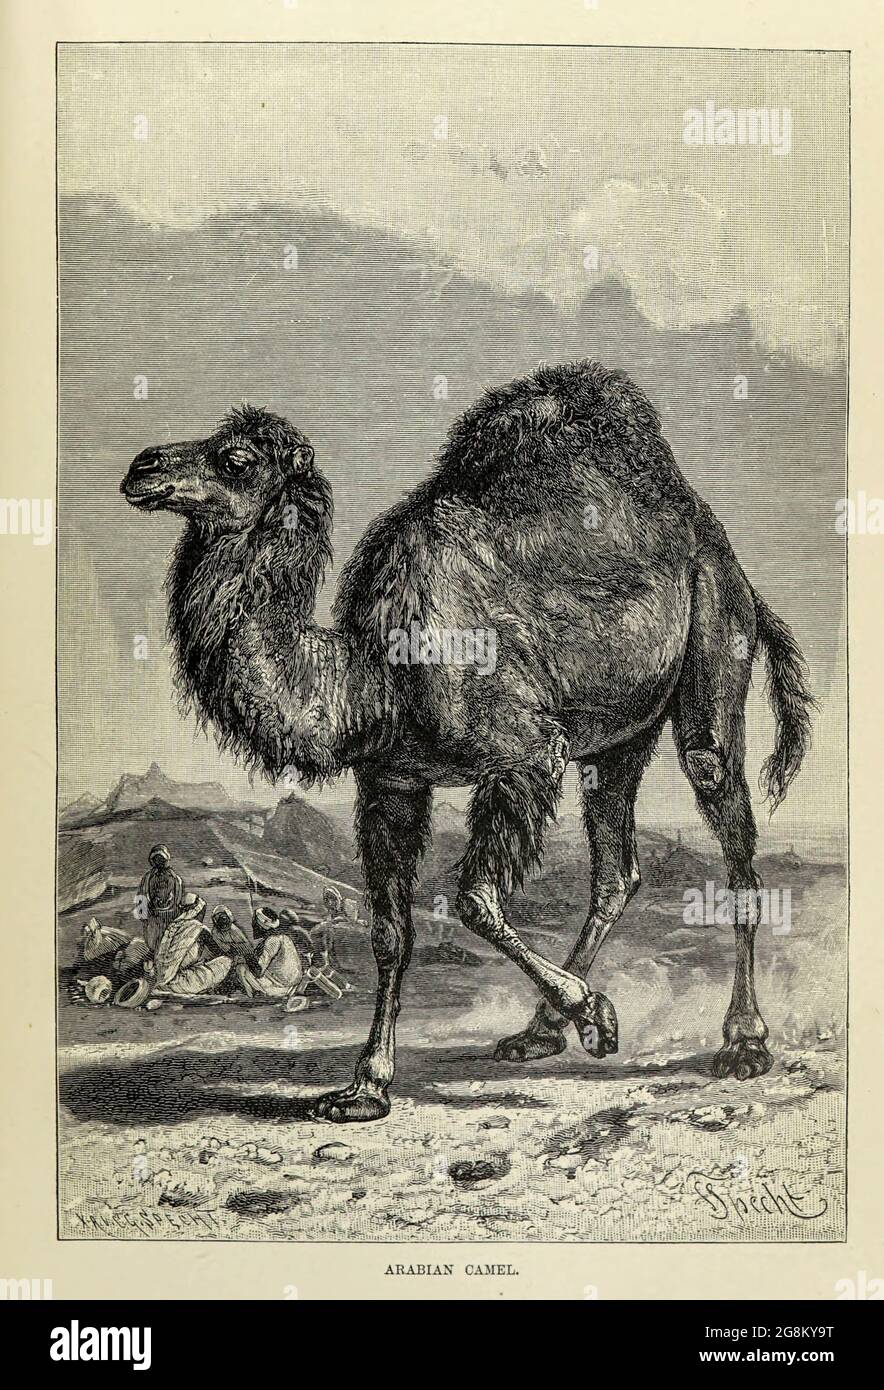 The dromedary (Camelus dromedarius) also called the Arabian camel, is a large even-toed ungulate, of the genus Camelus, with one hump on its back. From the book ' Royal Natural History ' Volume 2 Edited by Richard Lydekker, Published in London by Frederick Warne & Co in 1893-1894 Stock Photo